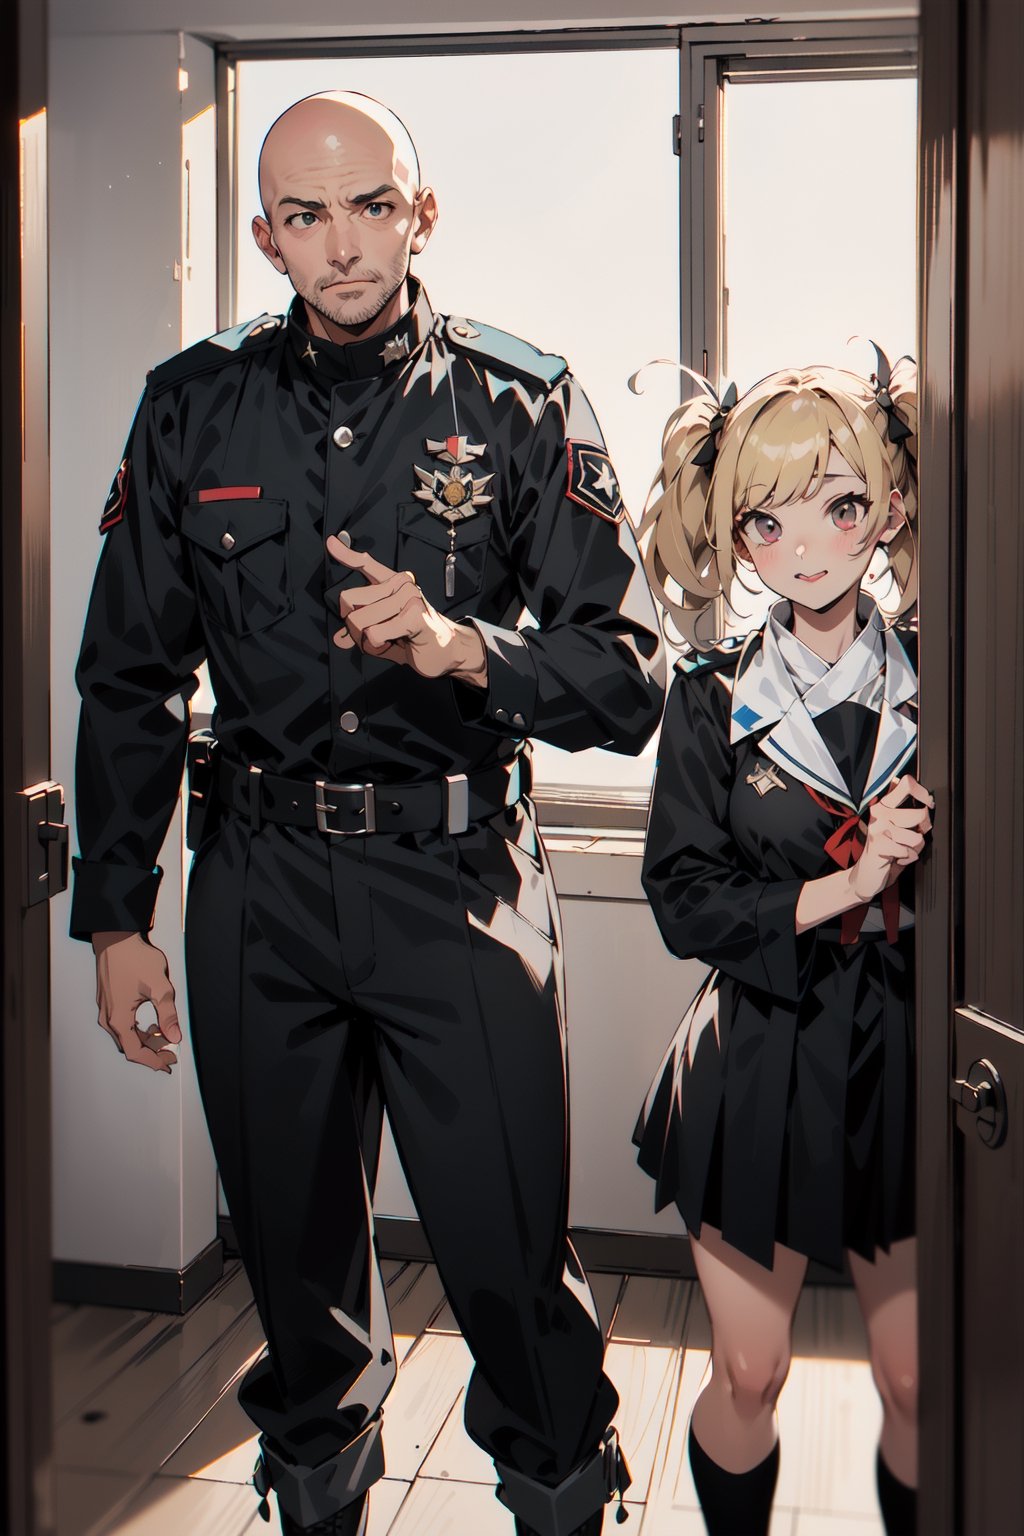 (MANGA:1.2)A middle-aged man with a bald head of black beard and two middle-aged men with cheerful faces are discussing arm-in-arm. They are dressed in orange work clothes, prison uniforms. The background is a room in a prison cell, A very young elementary school girl,  10 years old,  blond twin-tailed hair,  dressed in the officer's uniform of the former Japanese Navy,  with the rank of naval general and numerous decorations attached. She wears a military black coat,  black military boots,  I'm stunned by the empty space.
Negative prompt: EasyNegative
Steps: 40, Sampler: DPM++ SDE Karras, CFG scale: 12.0, Seed: 750992829, Size: 512x768, Model: _BlazingDrive_V09i, Denoising strength: 0.25, Clip skip: 2, TI hashes: easynegative, Version: v1.6.0.8-v3-2-g9930b53
Used Embeddings: easynegative